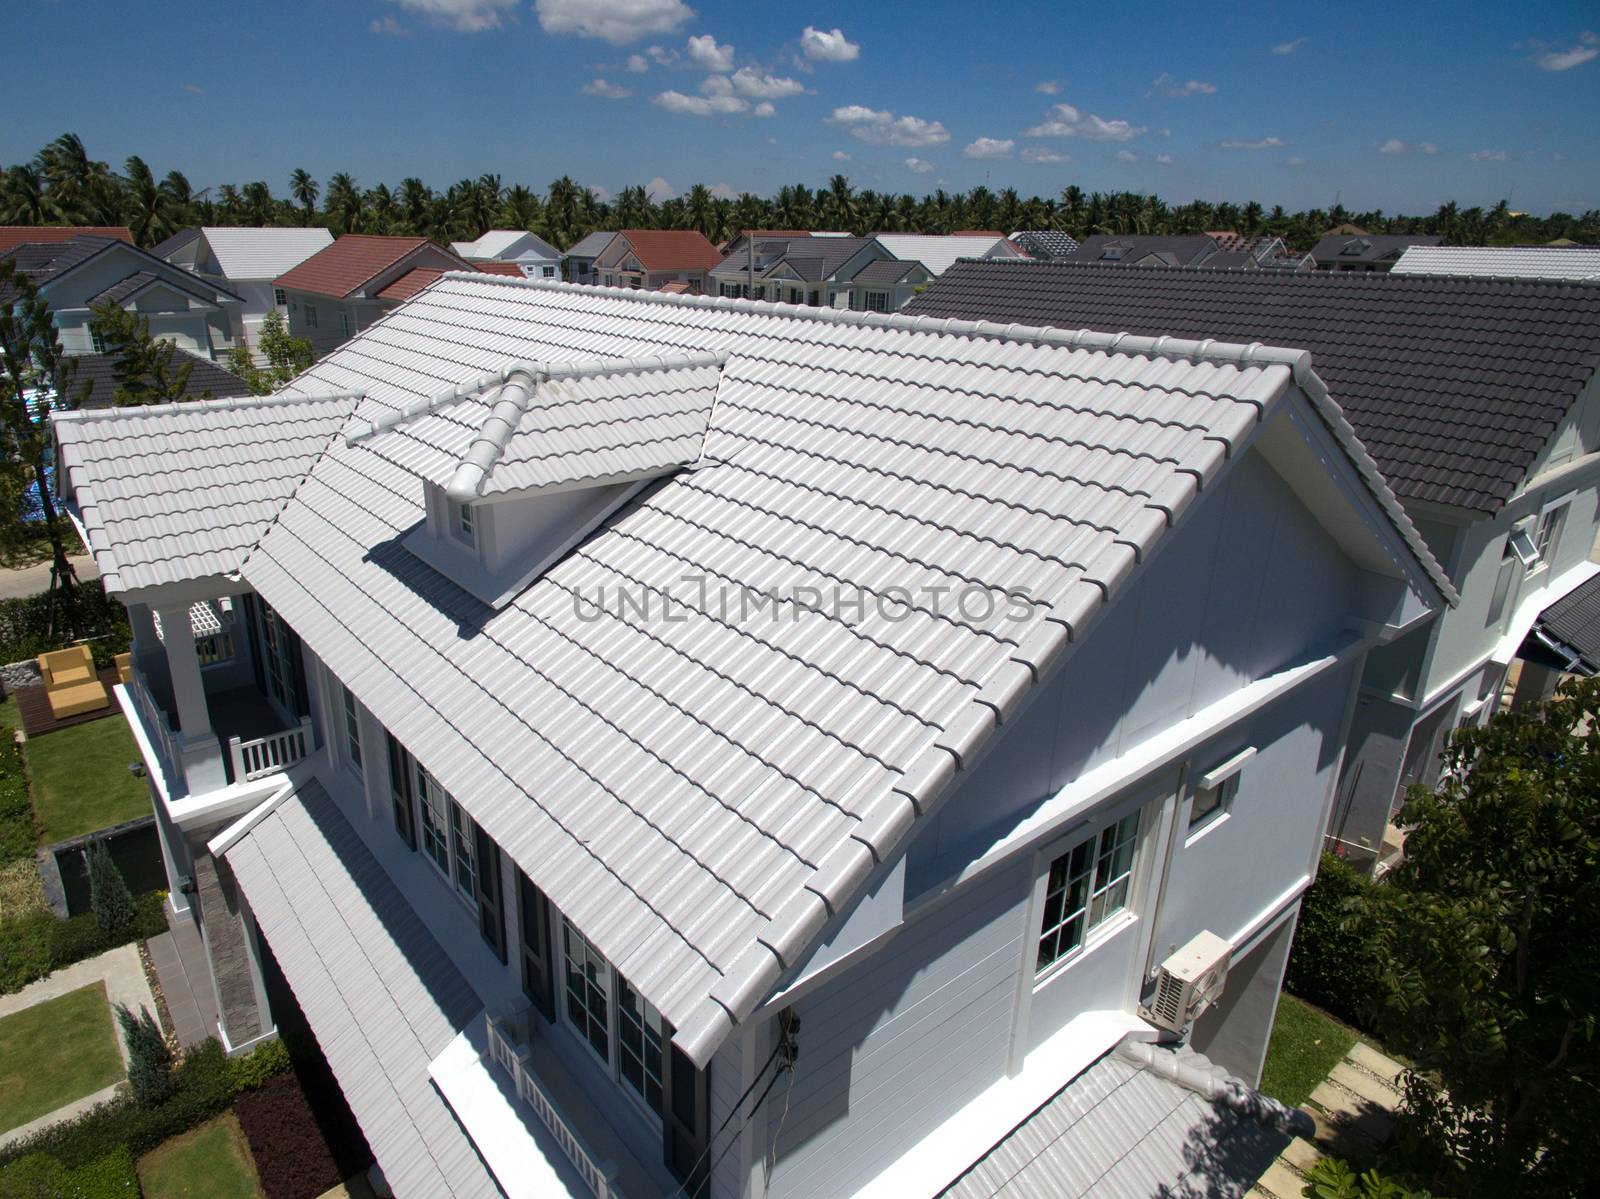 House Roofs tiles, new styles and colors